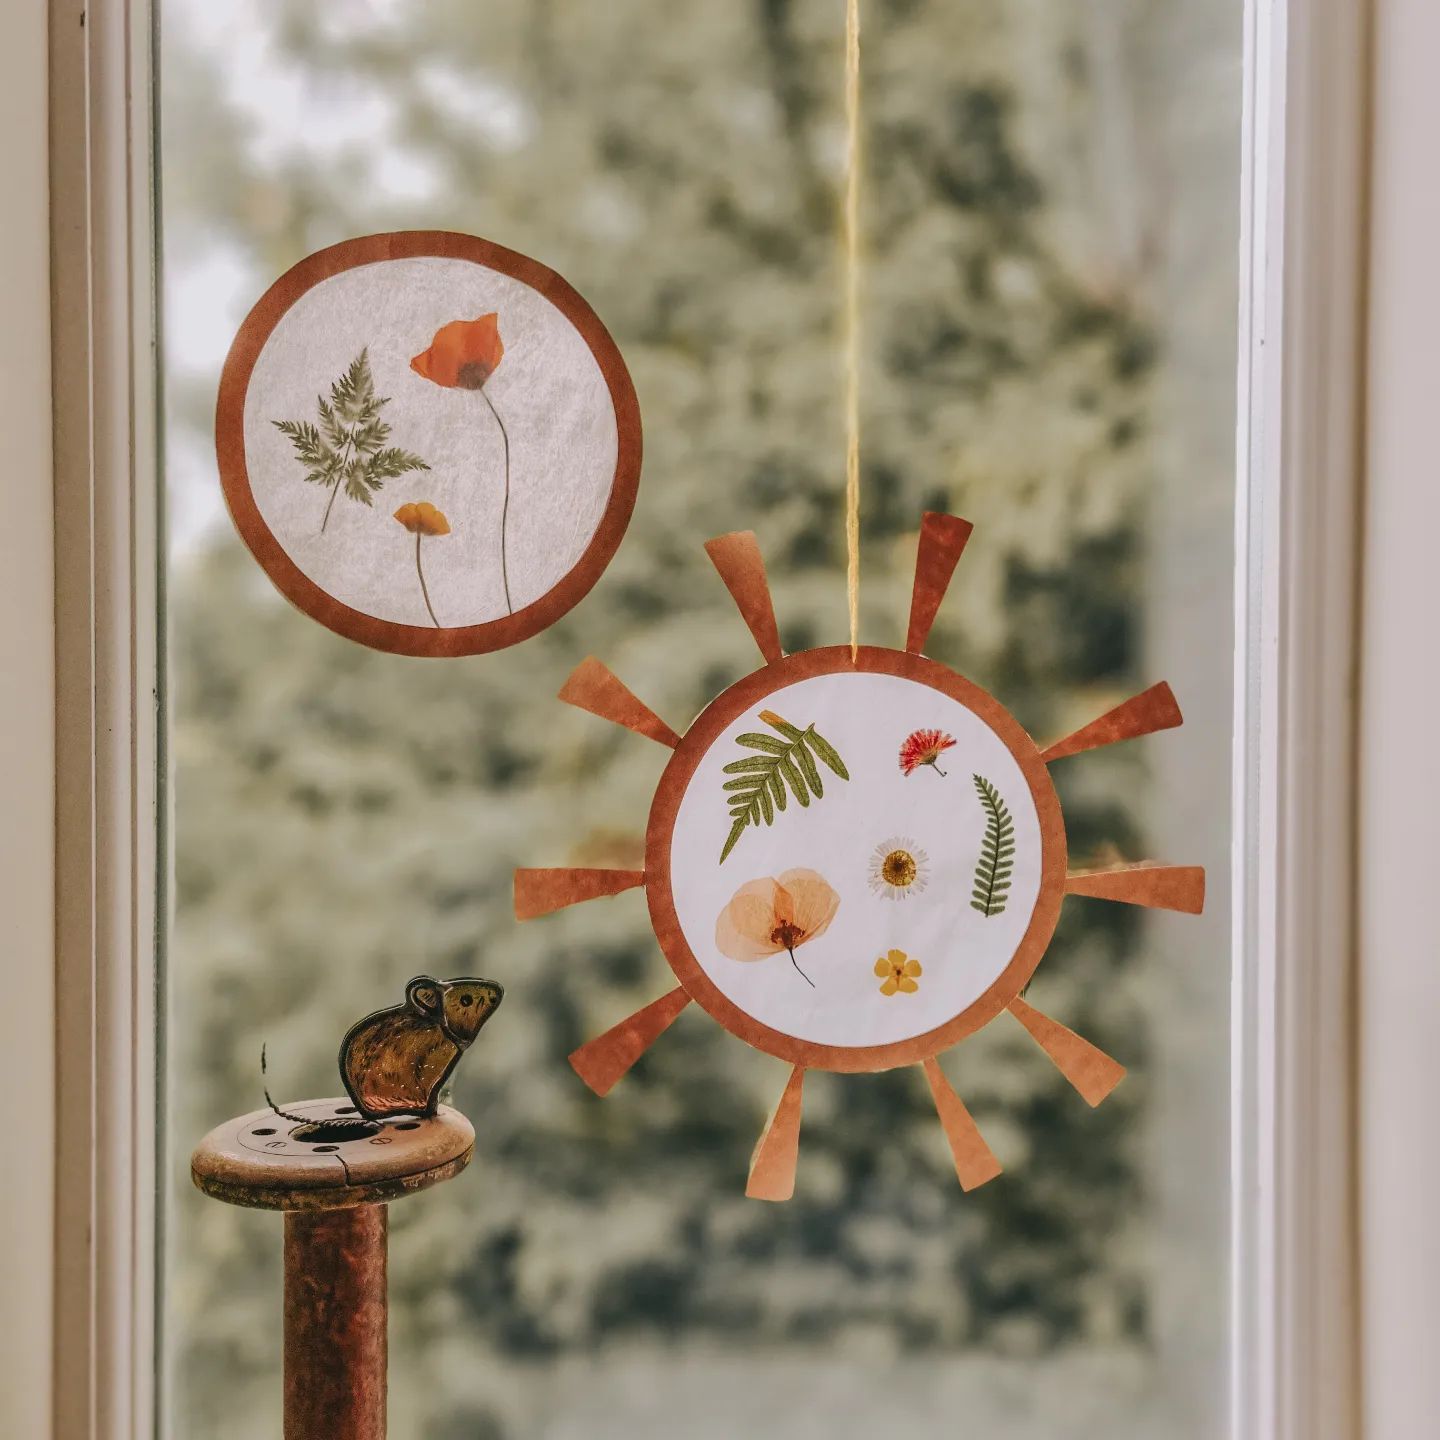 Circular crafts with the imprints of pressed flowers hanging against a window. Photo by Instagram user @kirstiecrafts.